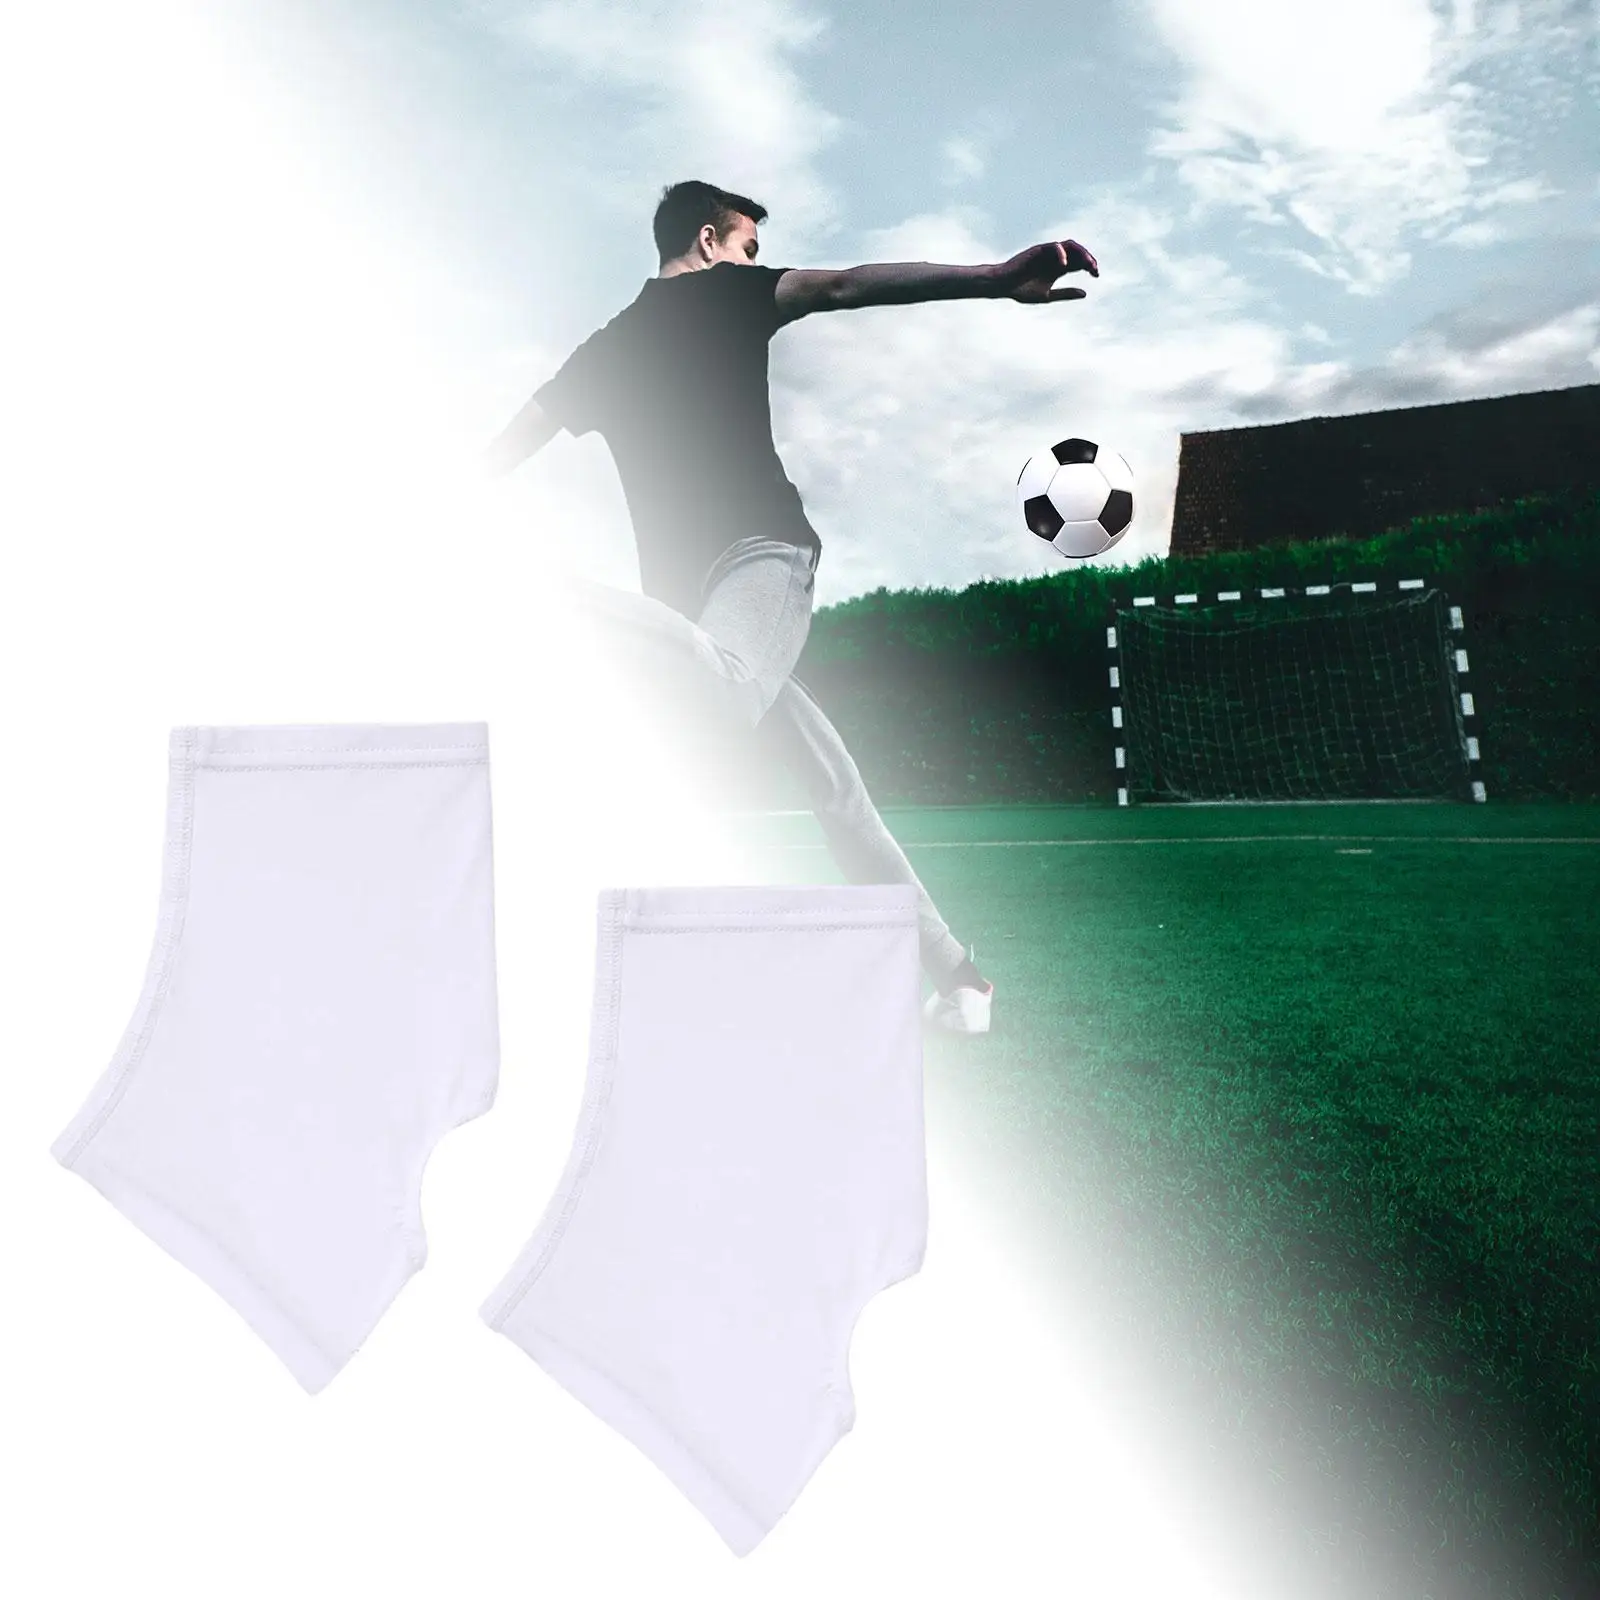 2Pcs Spats Cleat Socks Turf Hockey Wraps Shoes Cover Lacrosse Baseball Soccer Reusable Cleat Covers Sports Spats